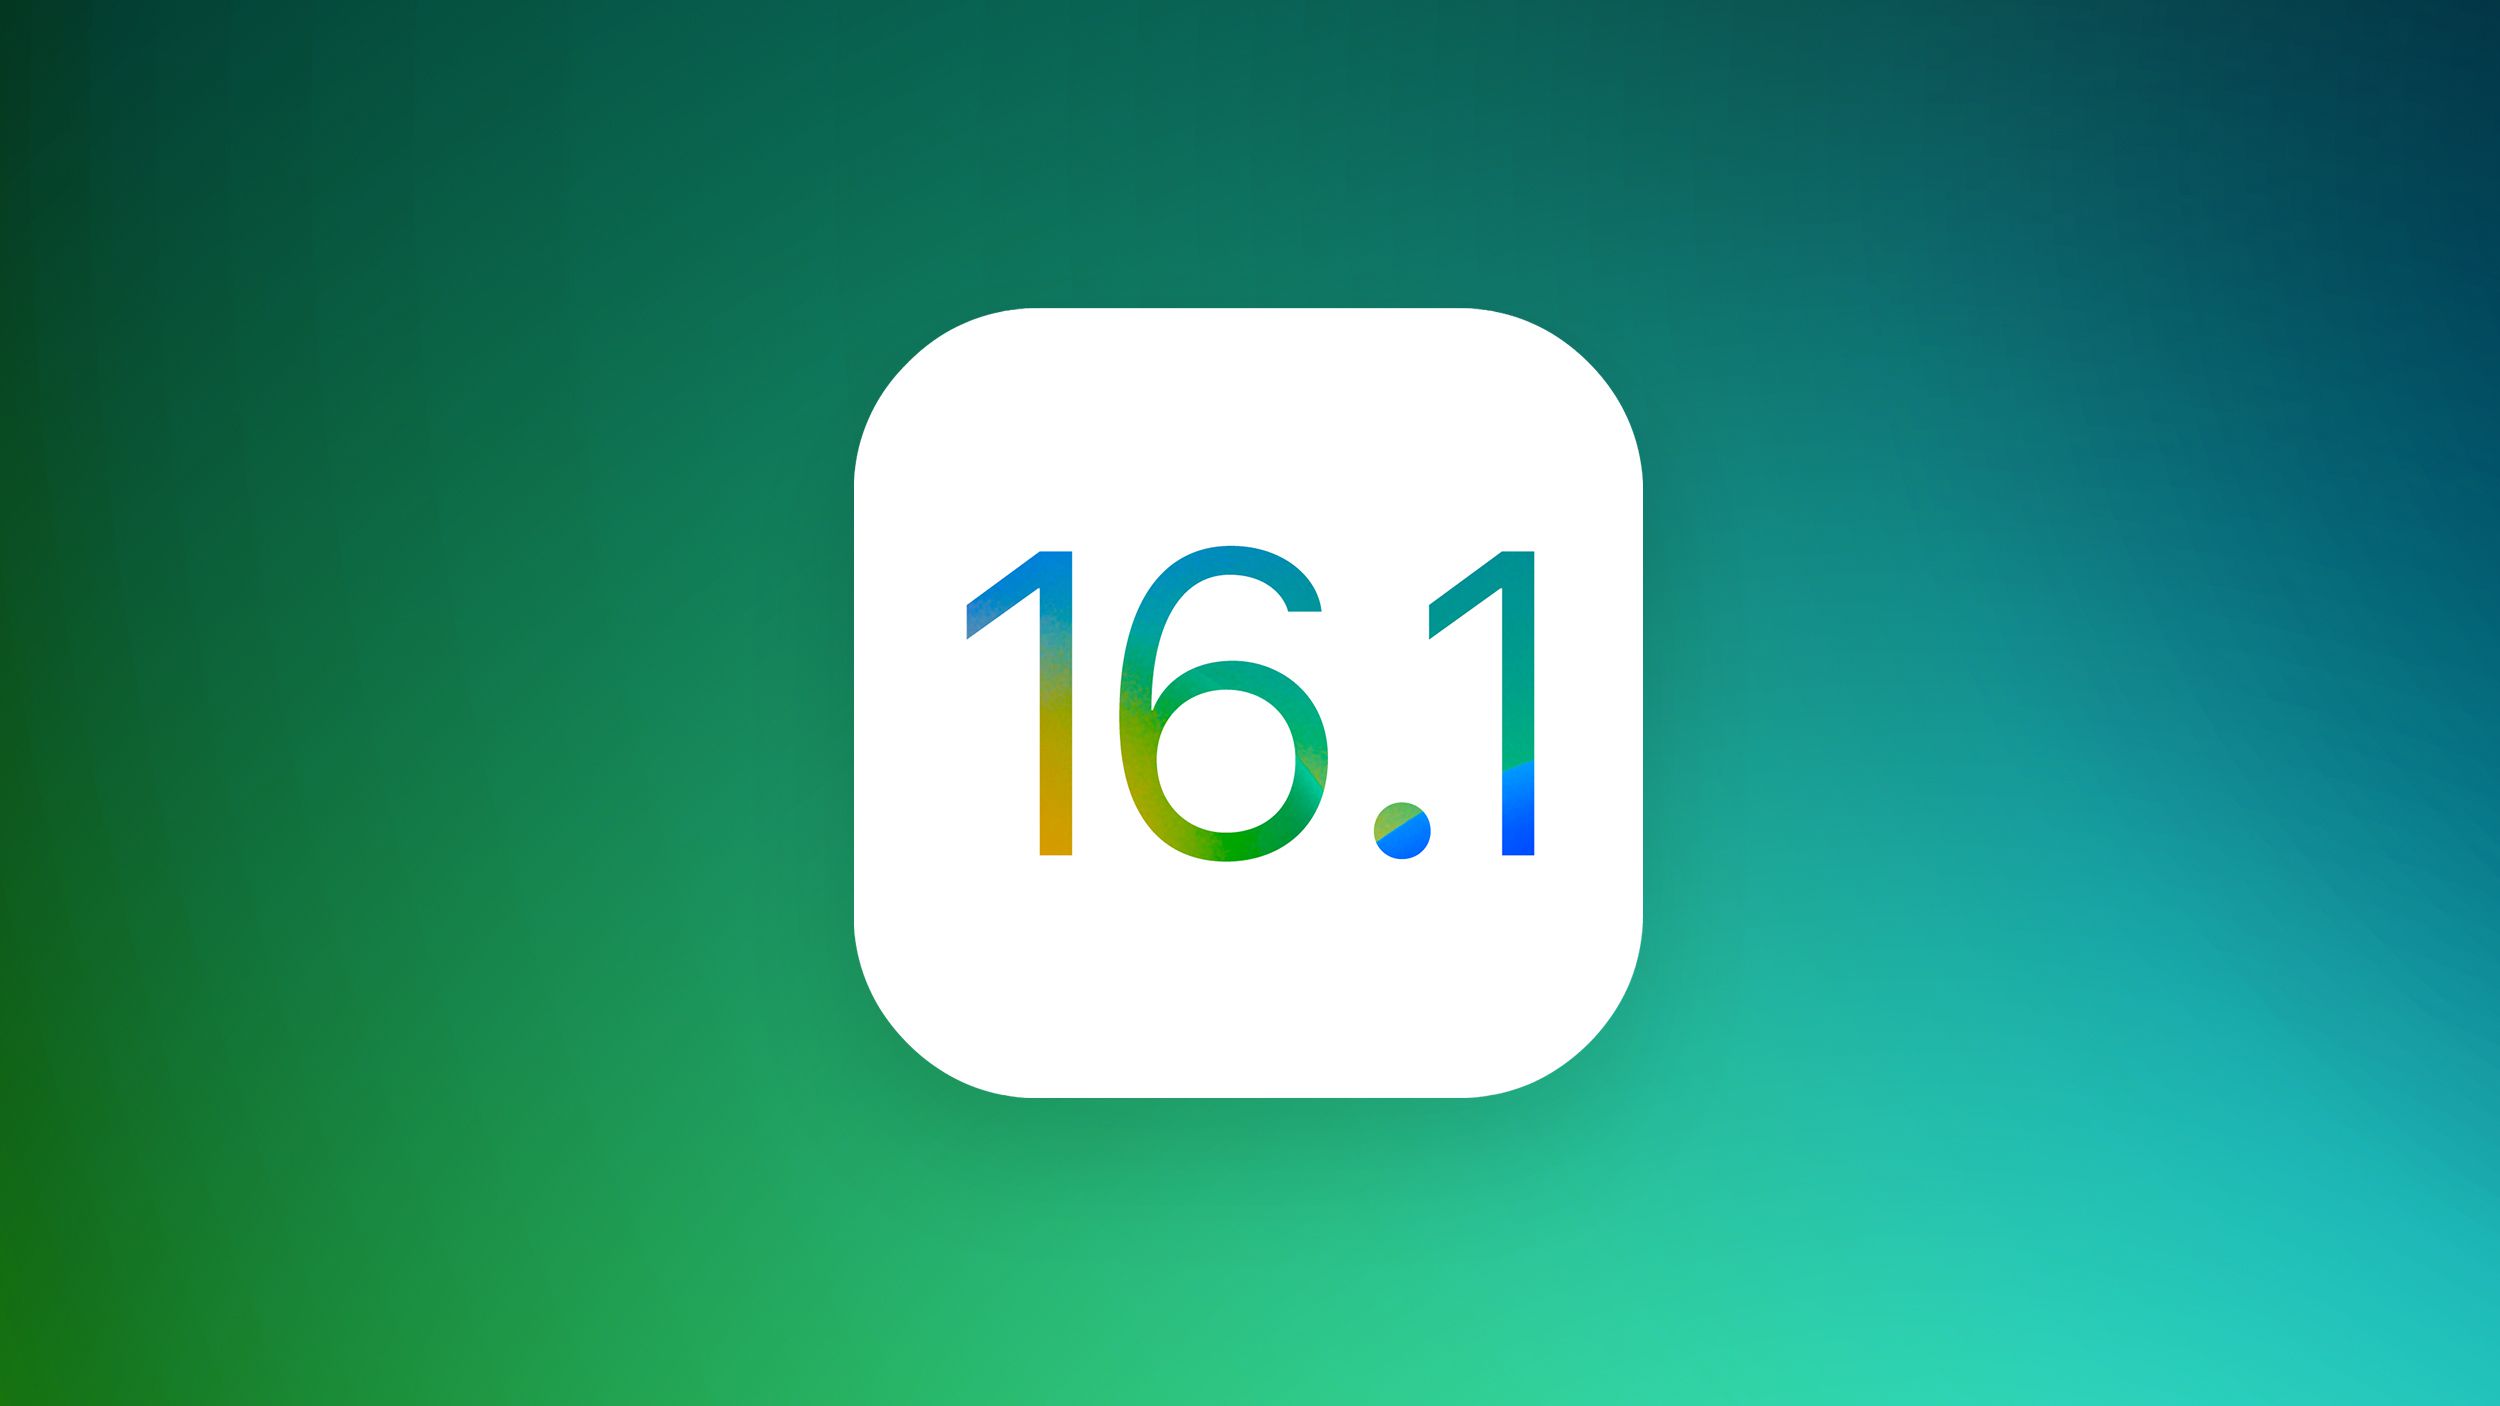 Apple Seeds New Betas of iOS 16.1 and iPadOS 16.1 to Developers